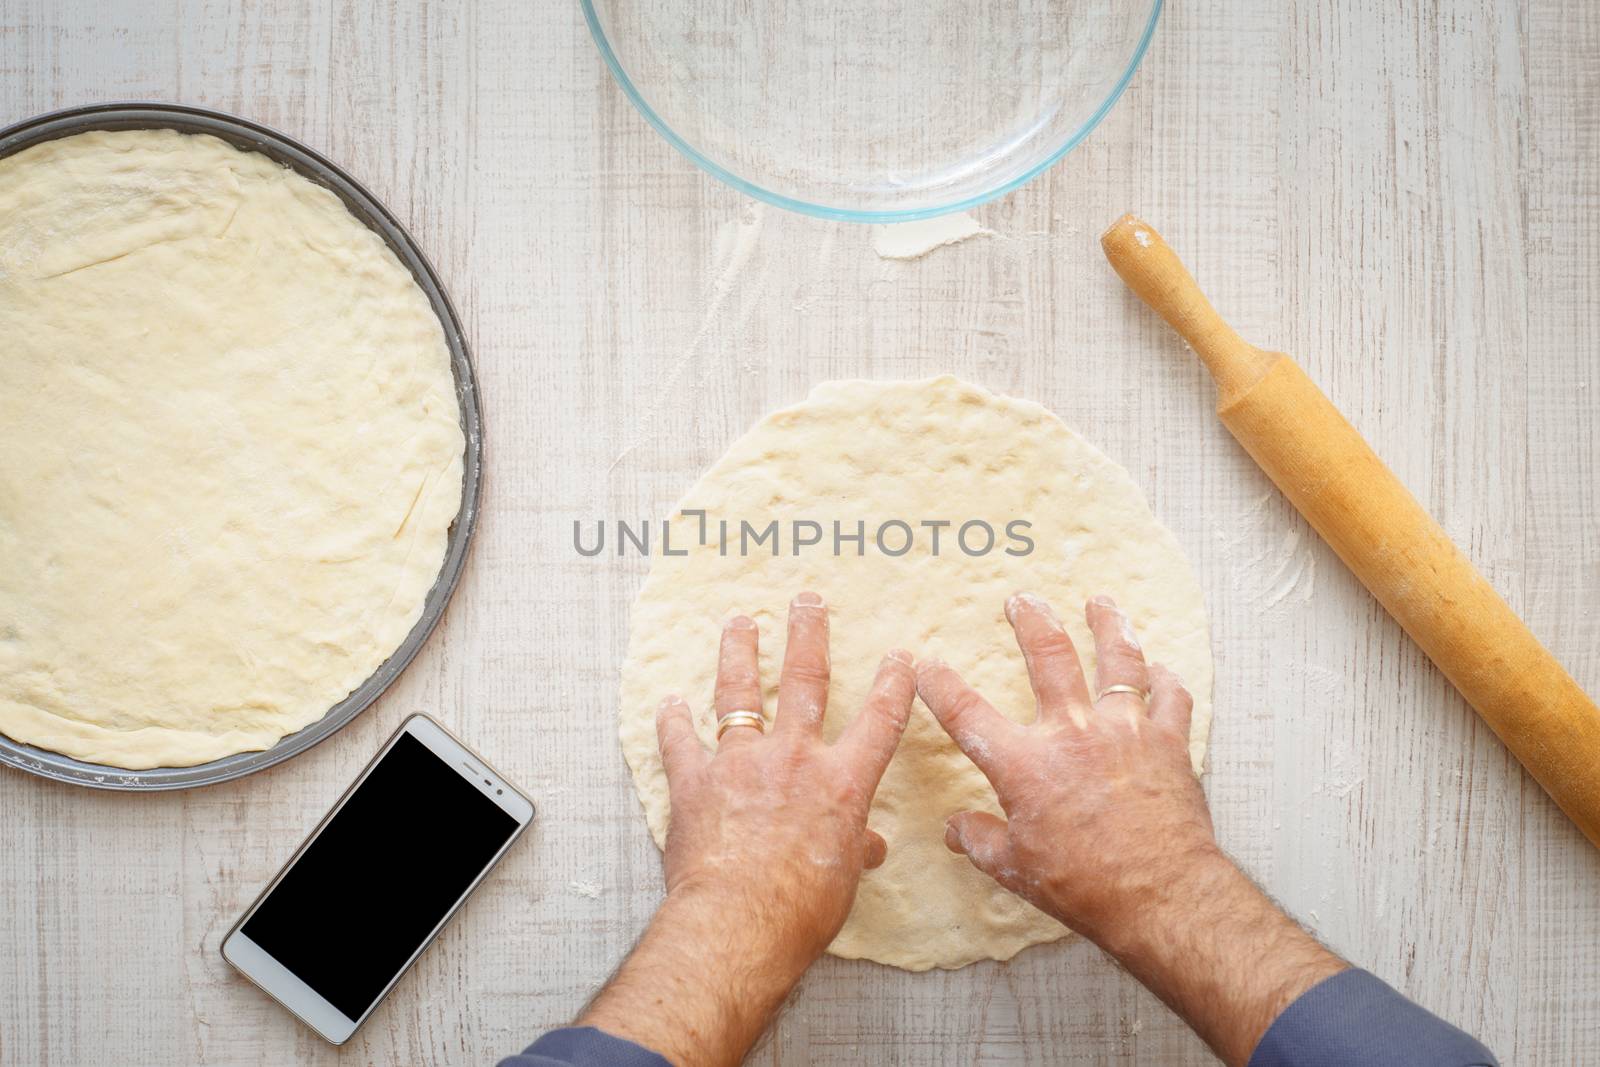 Man cooking dough for two pizzas on the wooden table horizontal